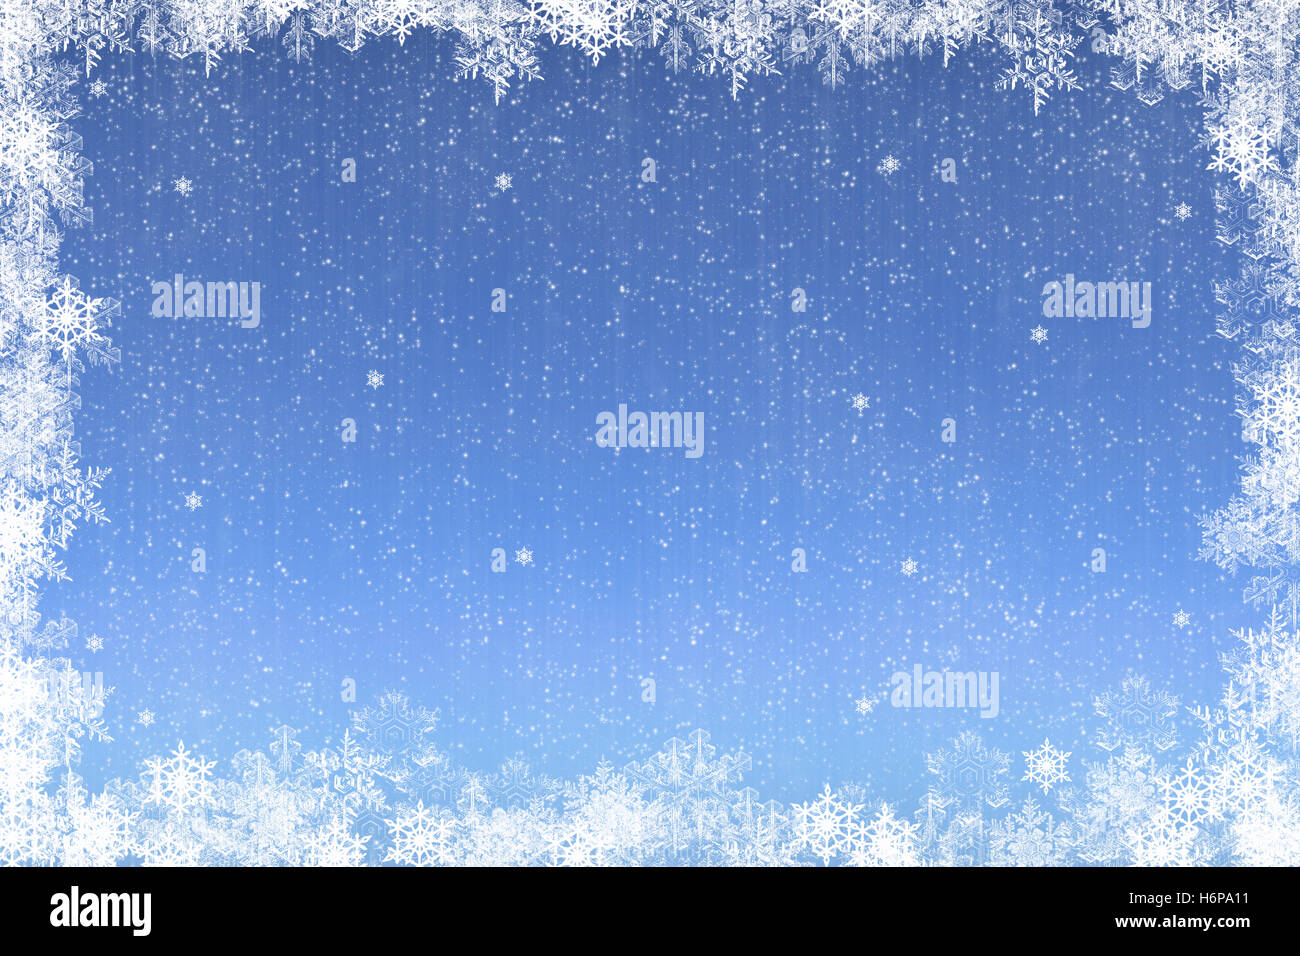 blue winter snow coke cocaine material drug anaesthetic addictive drug illustration snowflakes abstract edge crystals christmas Stock Photo